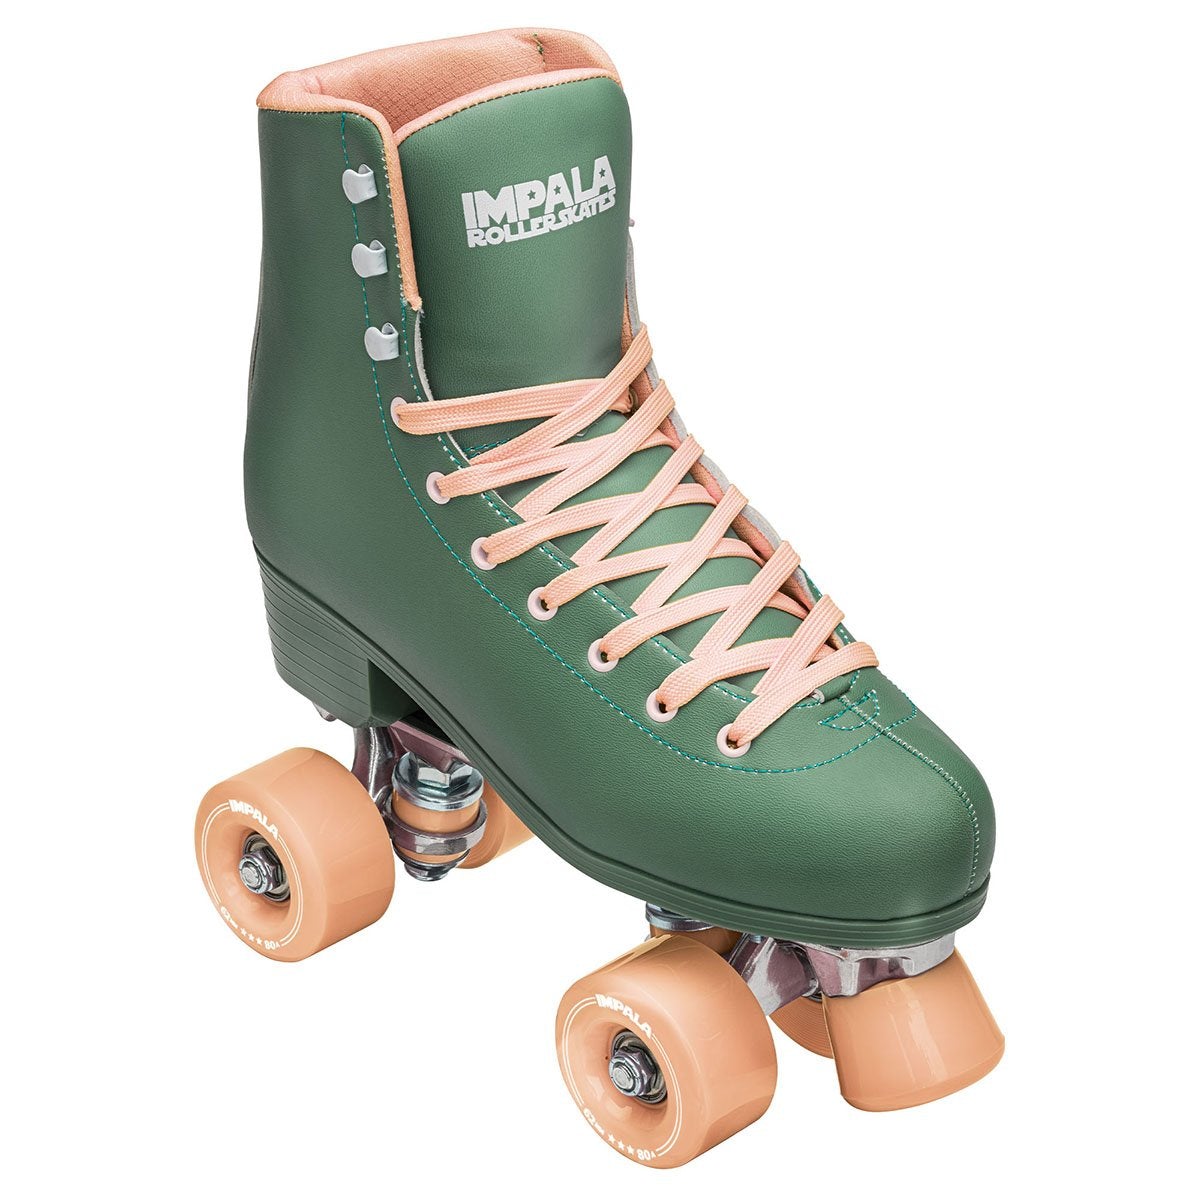 Rollers Quad Impala - Forest Green